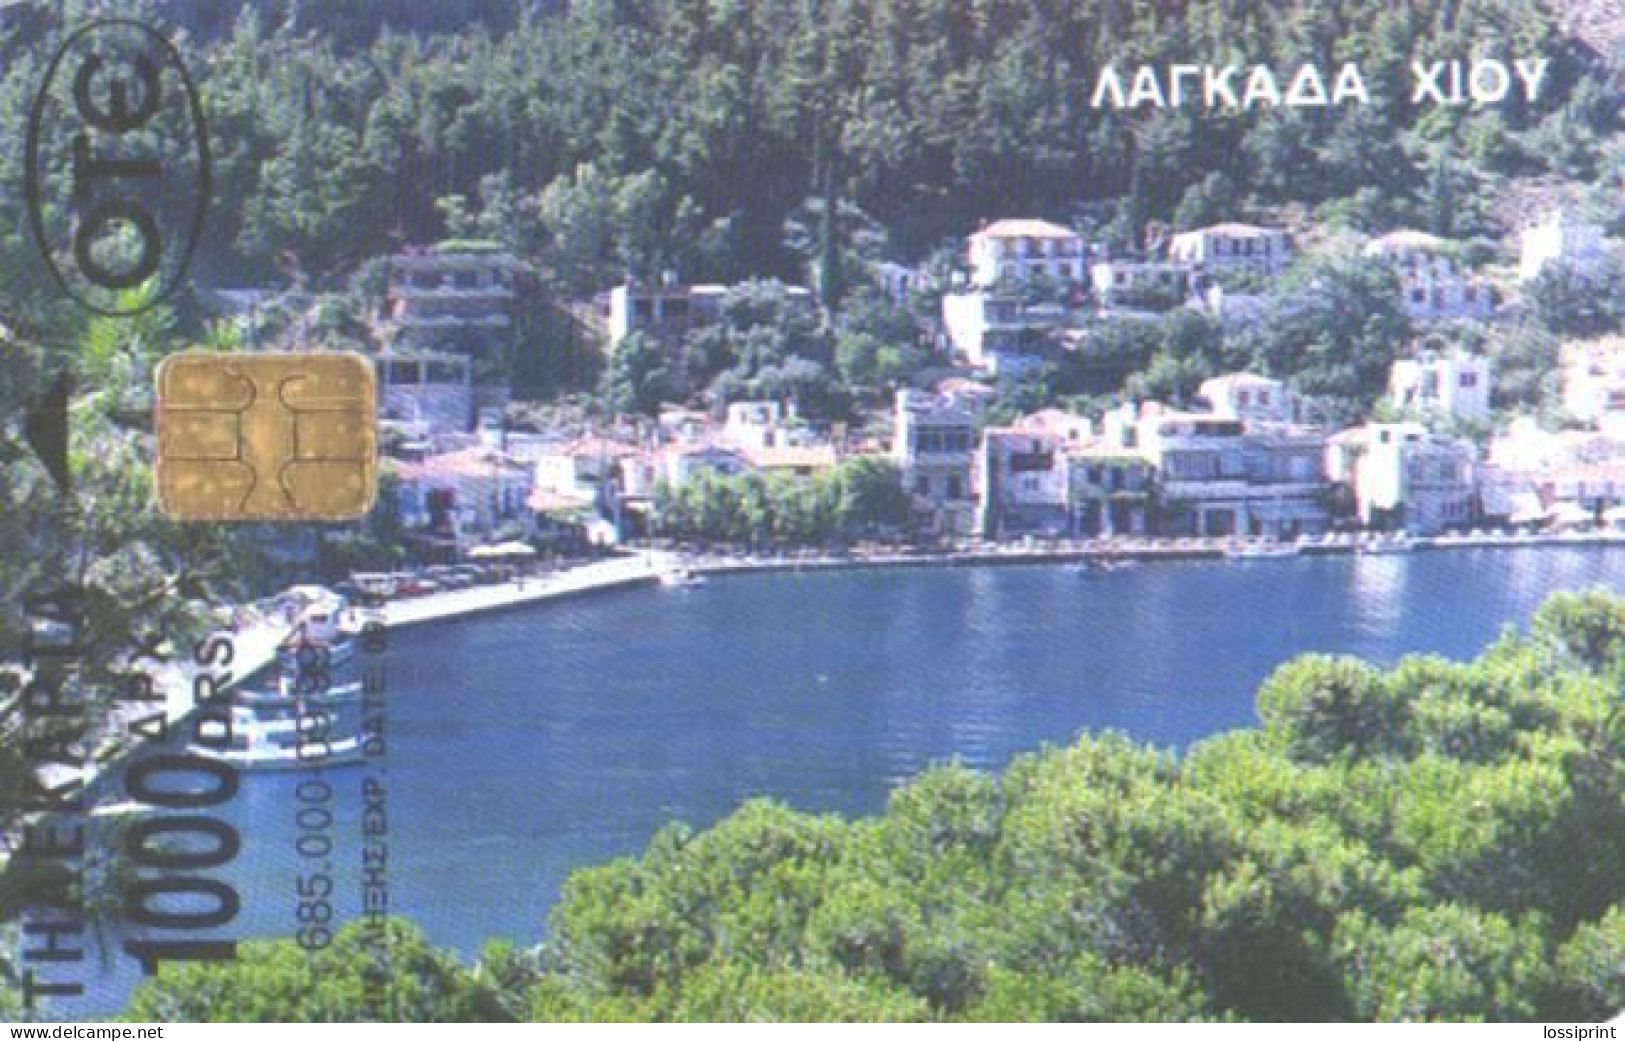 Greece:Used Phonecard, OTE, 1000 Drahms, Lagkada Xioy, Town View, 1999 - Griechenland